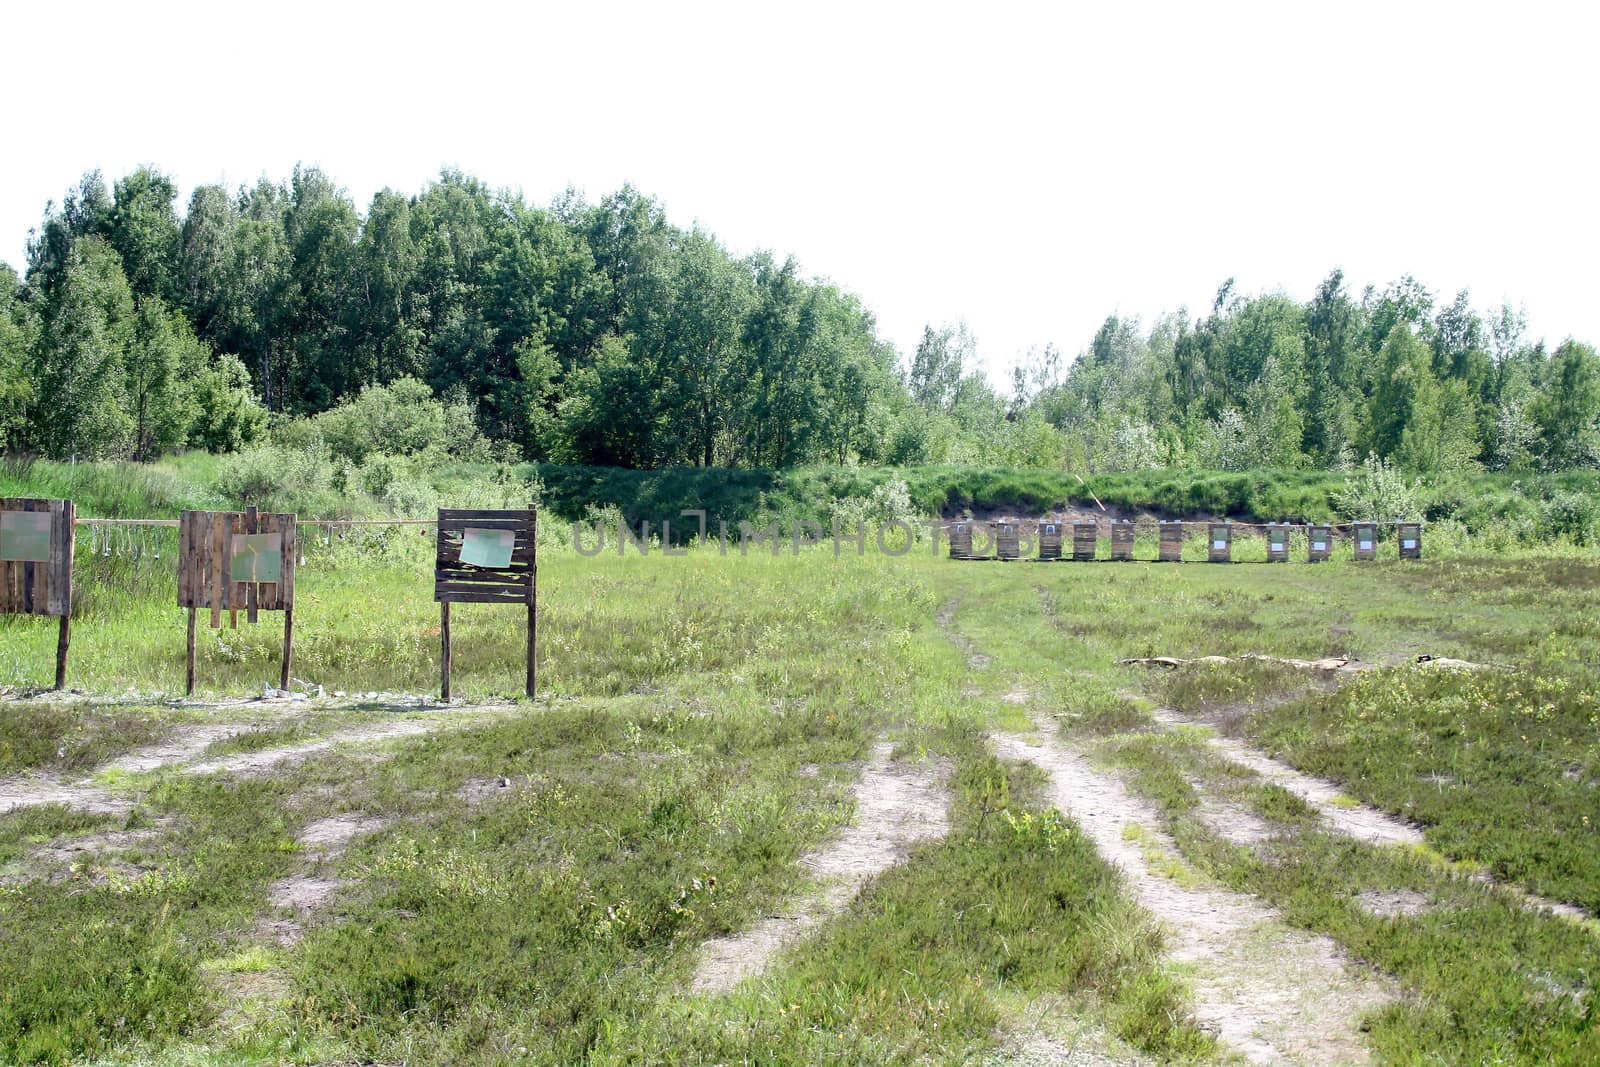 Shooting range with targets on proving ground in Belarus

